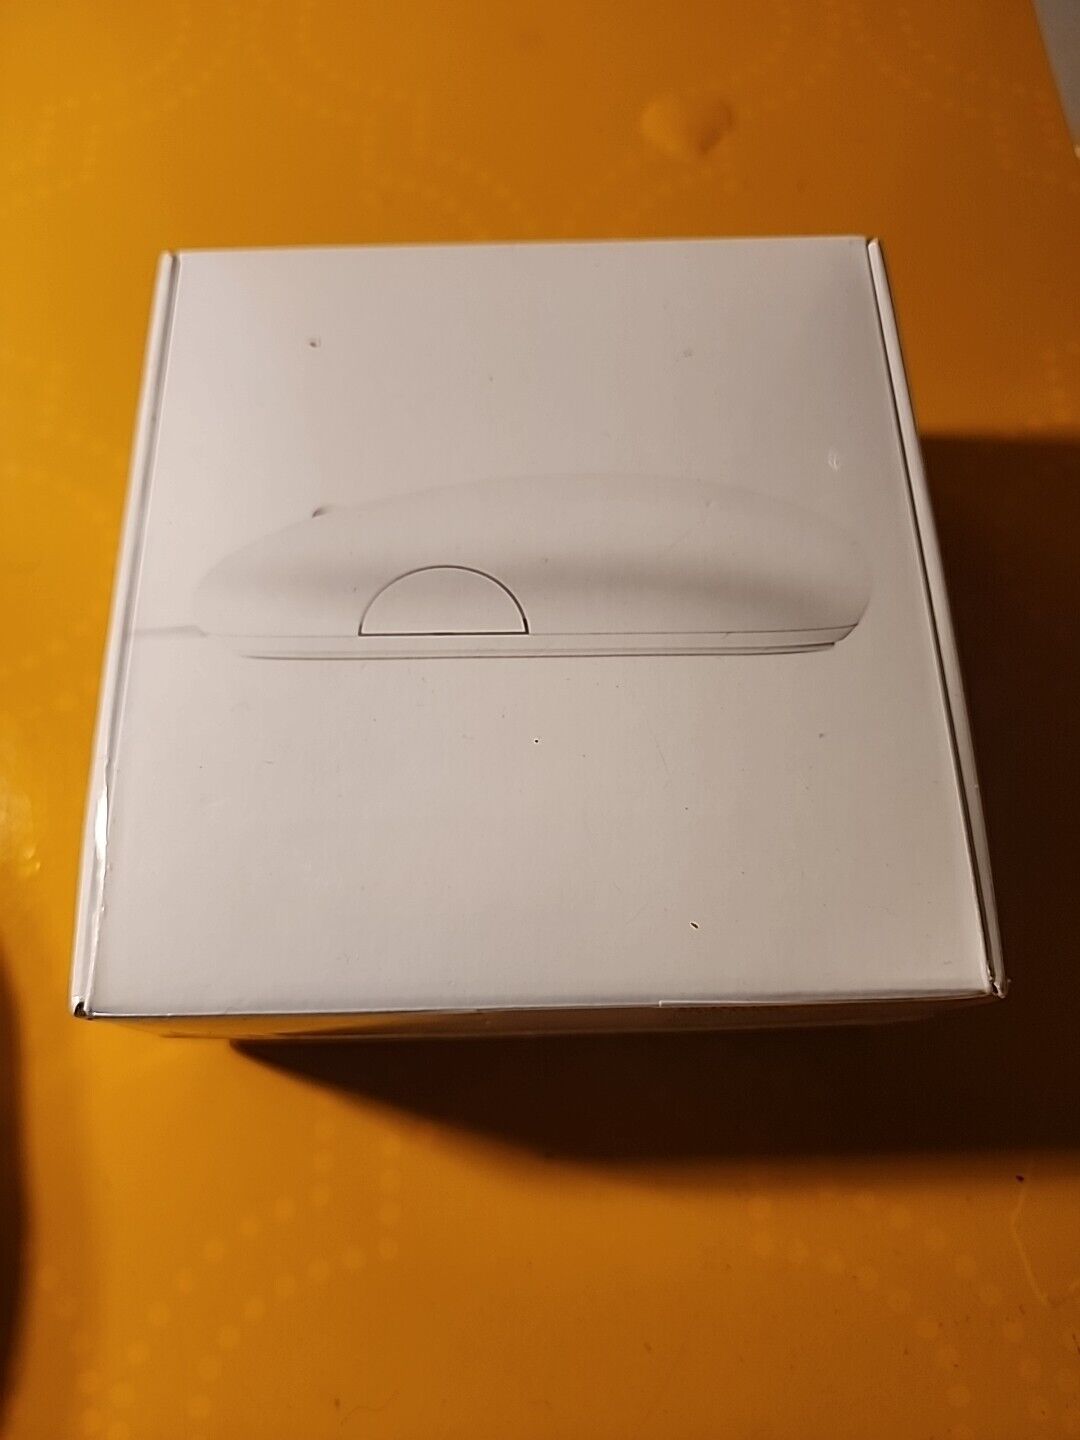 NEW Apple Wired USB Optical Mouse - A1152 - MB112LL/B - Sealed Box - 2009